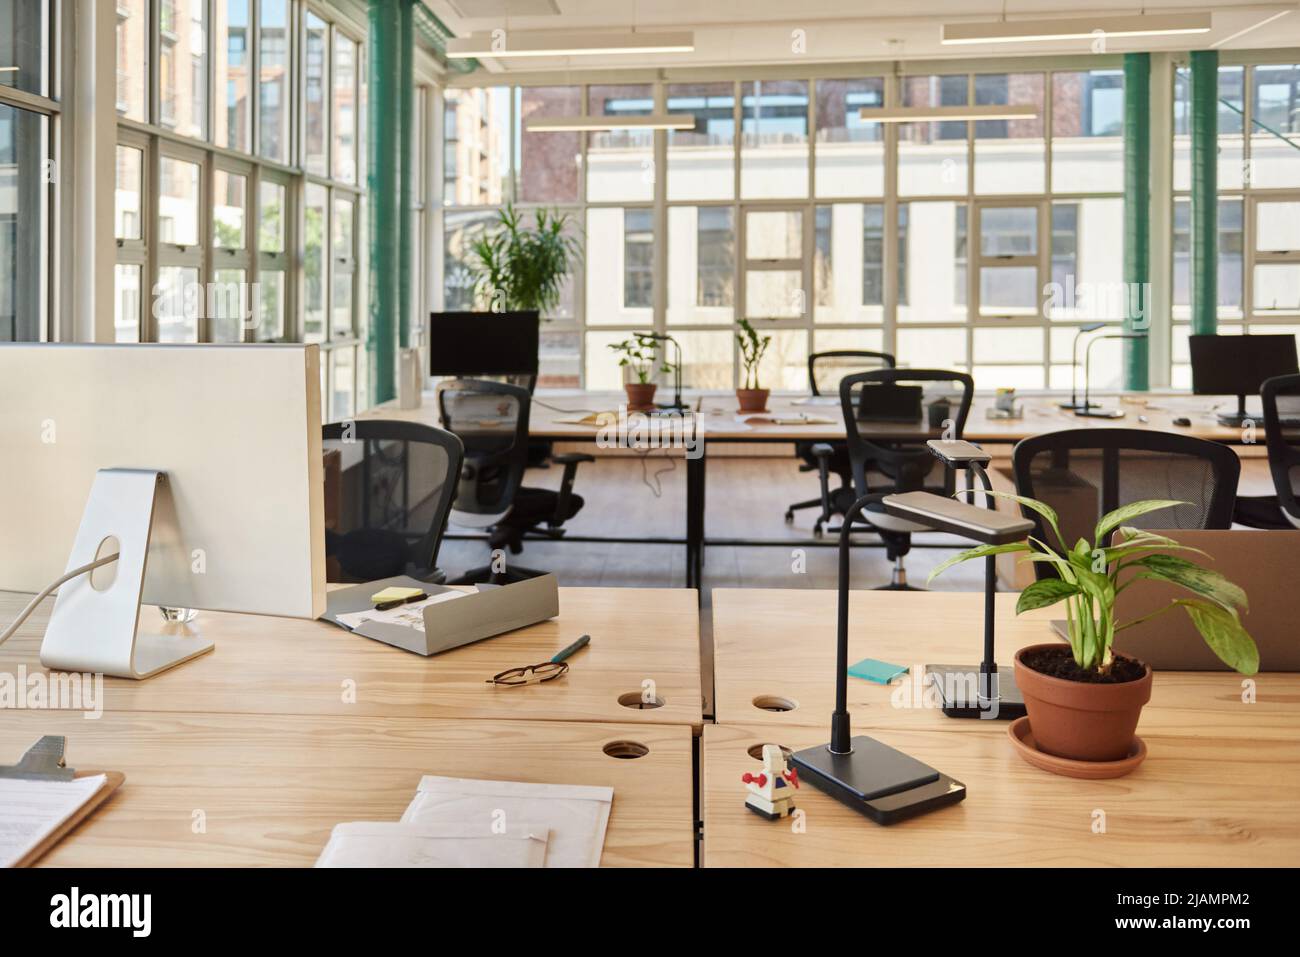 Desk in a modern office space after working hours Stock Photo